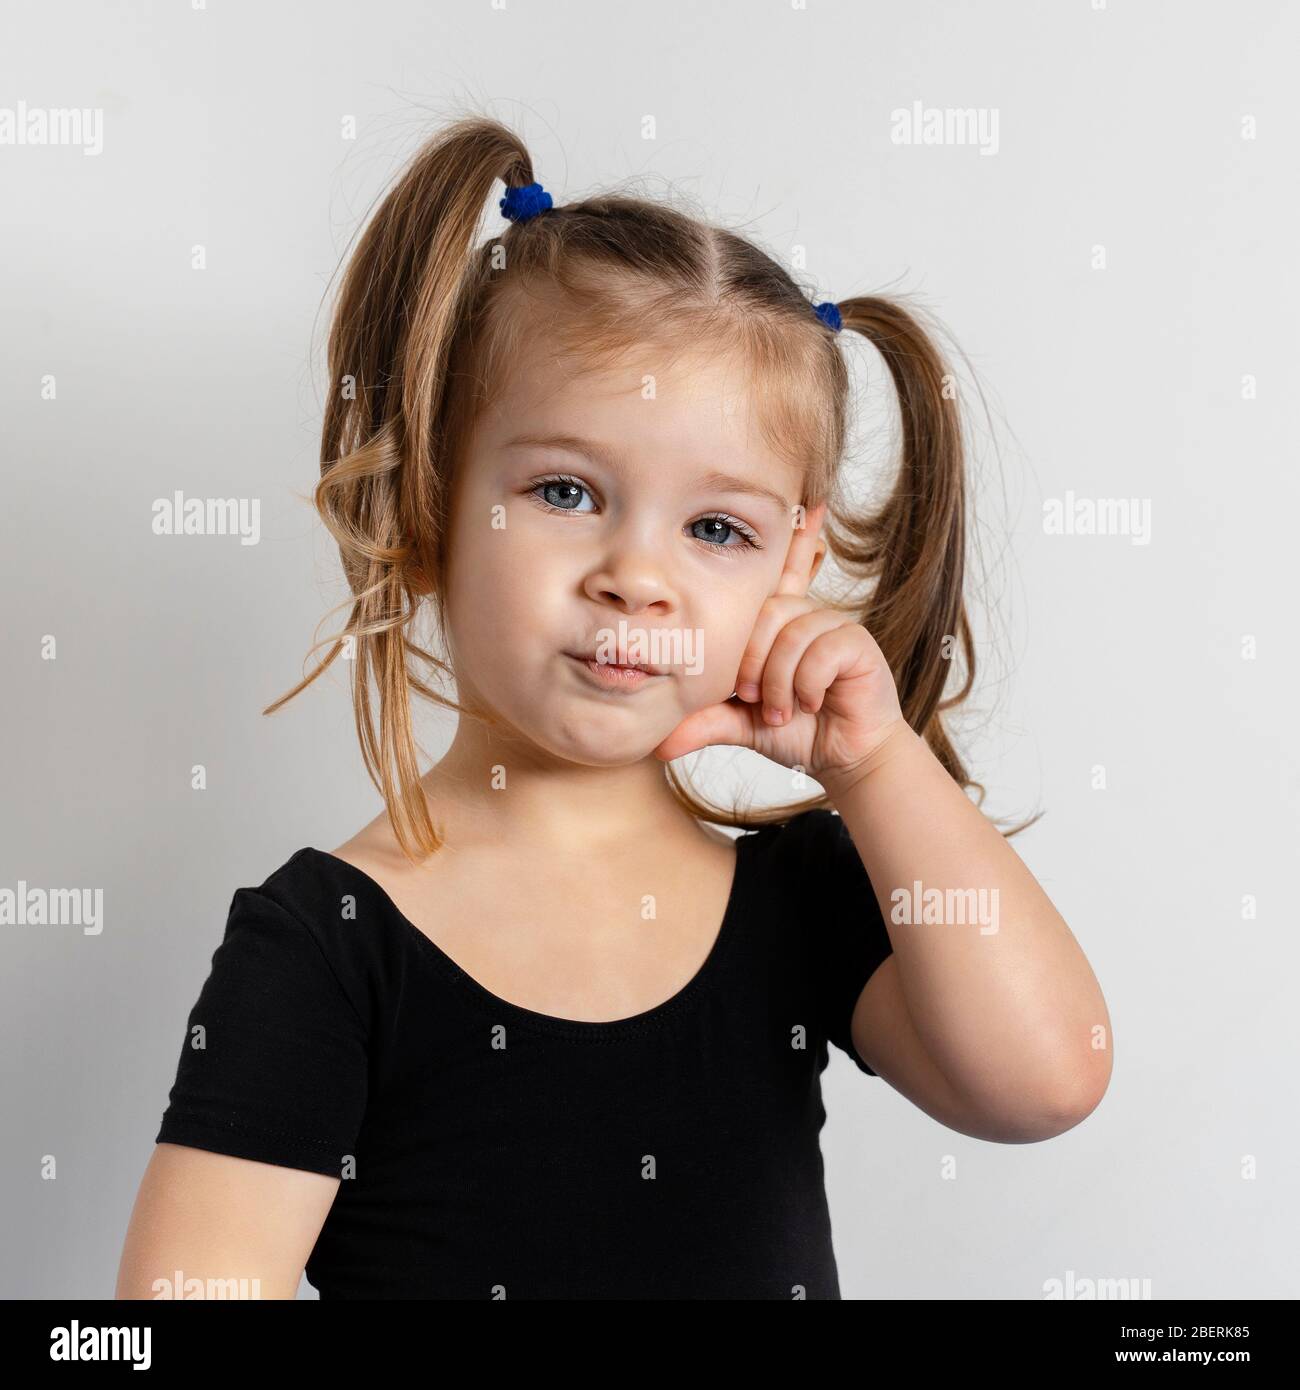 pretty little girl with two ponytails is standing in a pensive pose on a light background. Stock Photo